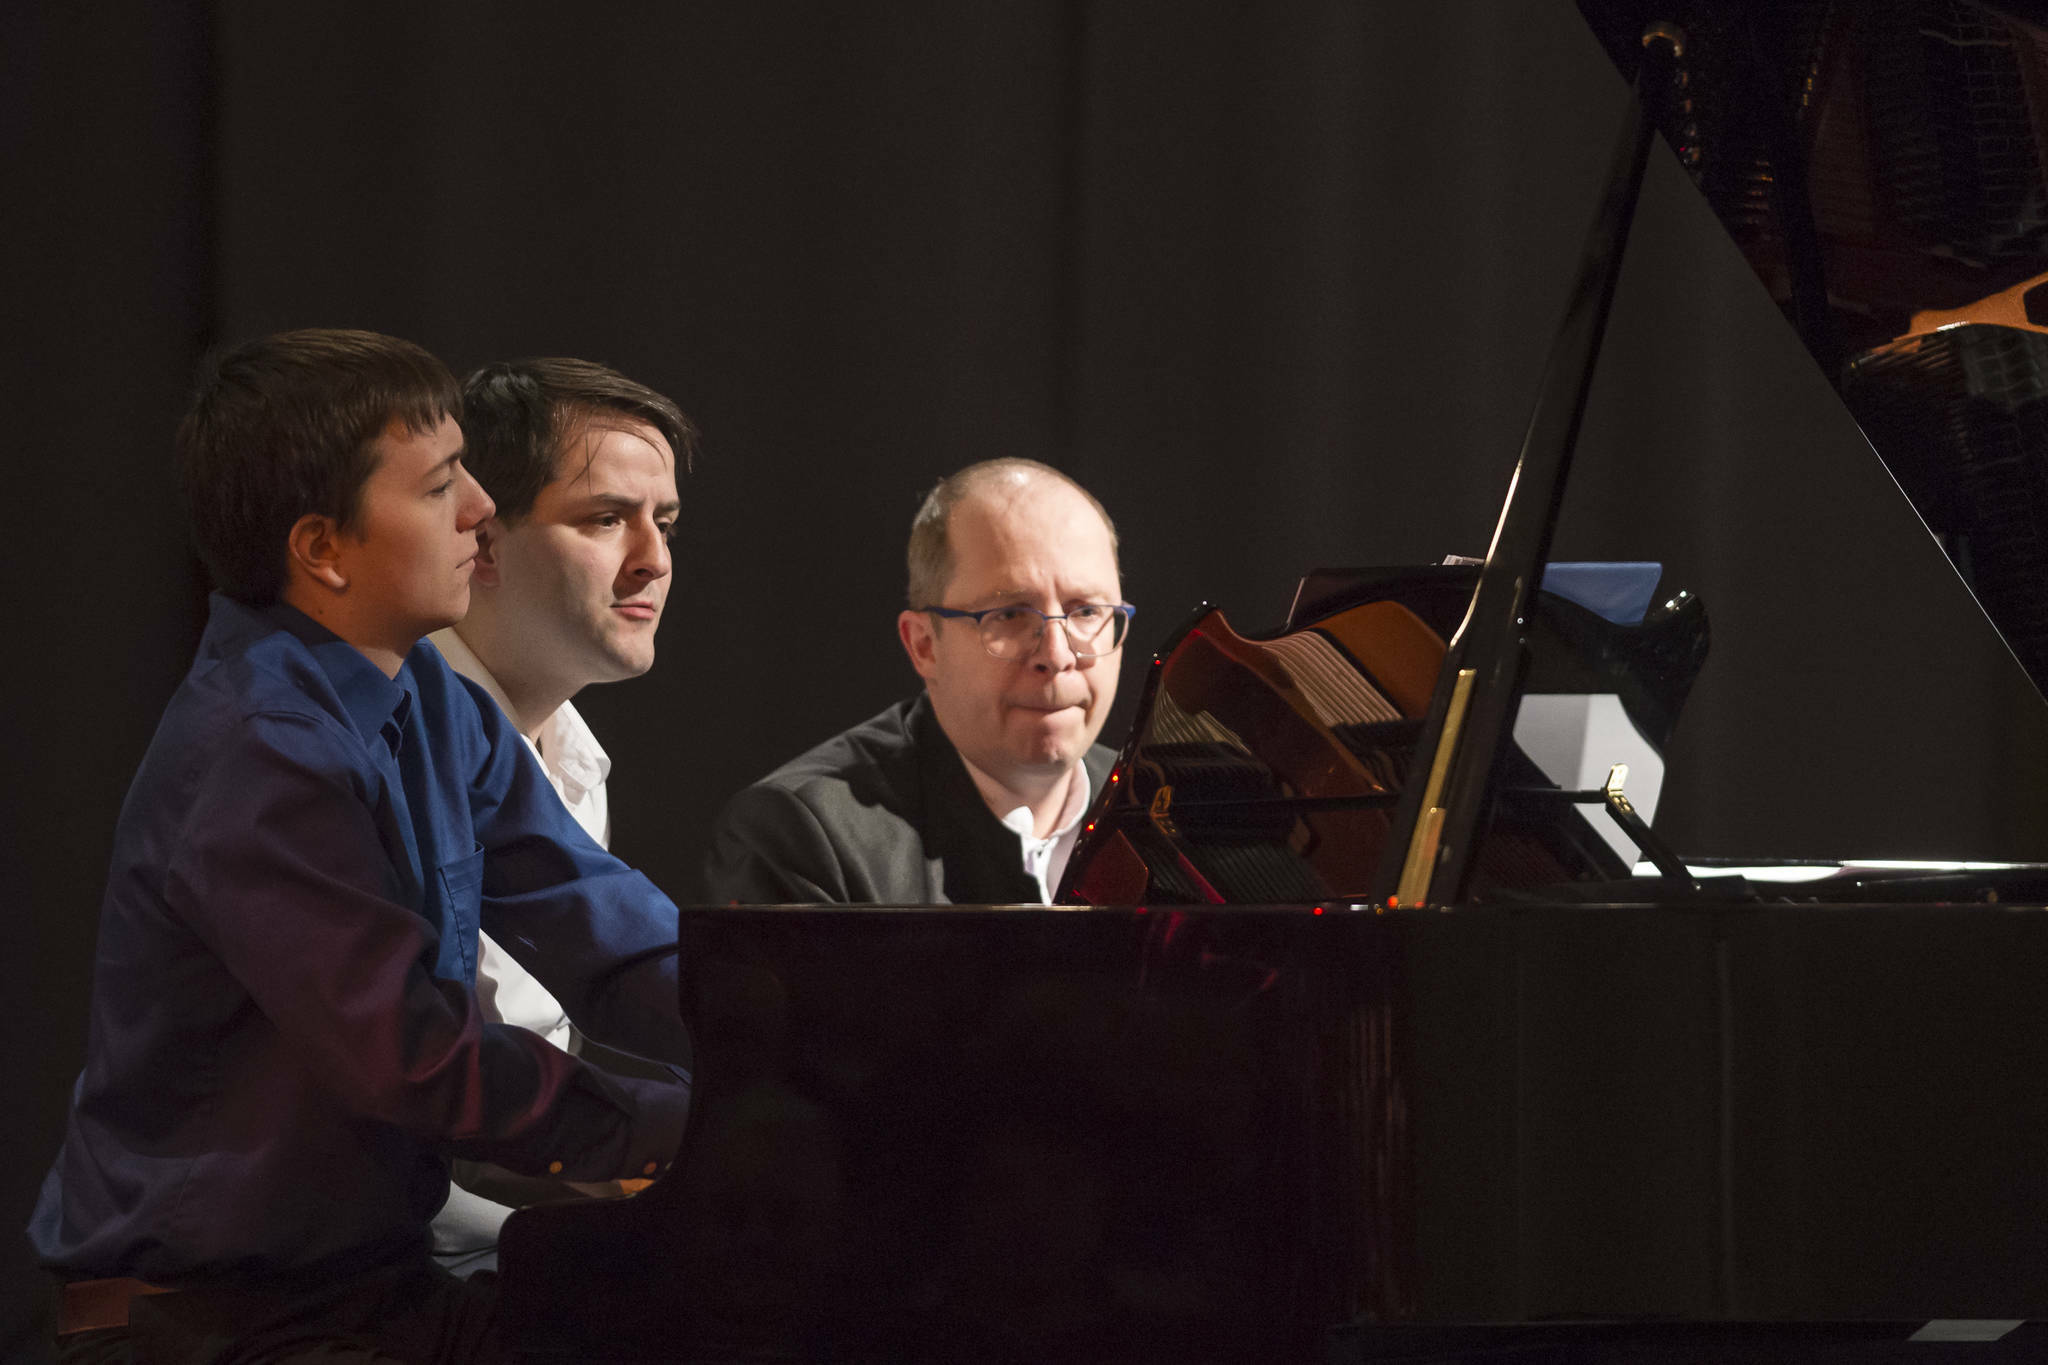 Michael Penn / Juneau Empire File
Kyle Farley-Robinson, left, Jon Hays, center, and Dr. Alexander Tutunov play “Romance And Waltz For Six Hands Piano” by Sergei Rachmaninoff during the Juneau Piano Series featuring Dr. Tutunov at the Juneau Arts and Culture Center on Friday, Jan. 18, 2019.